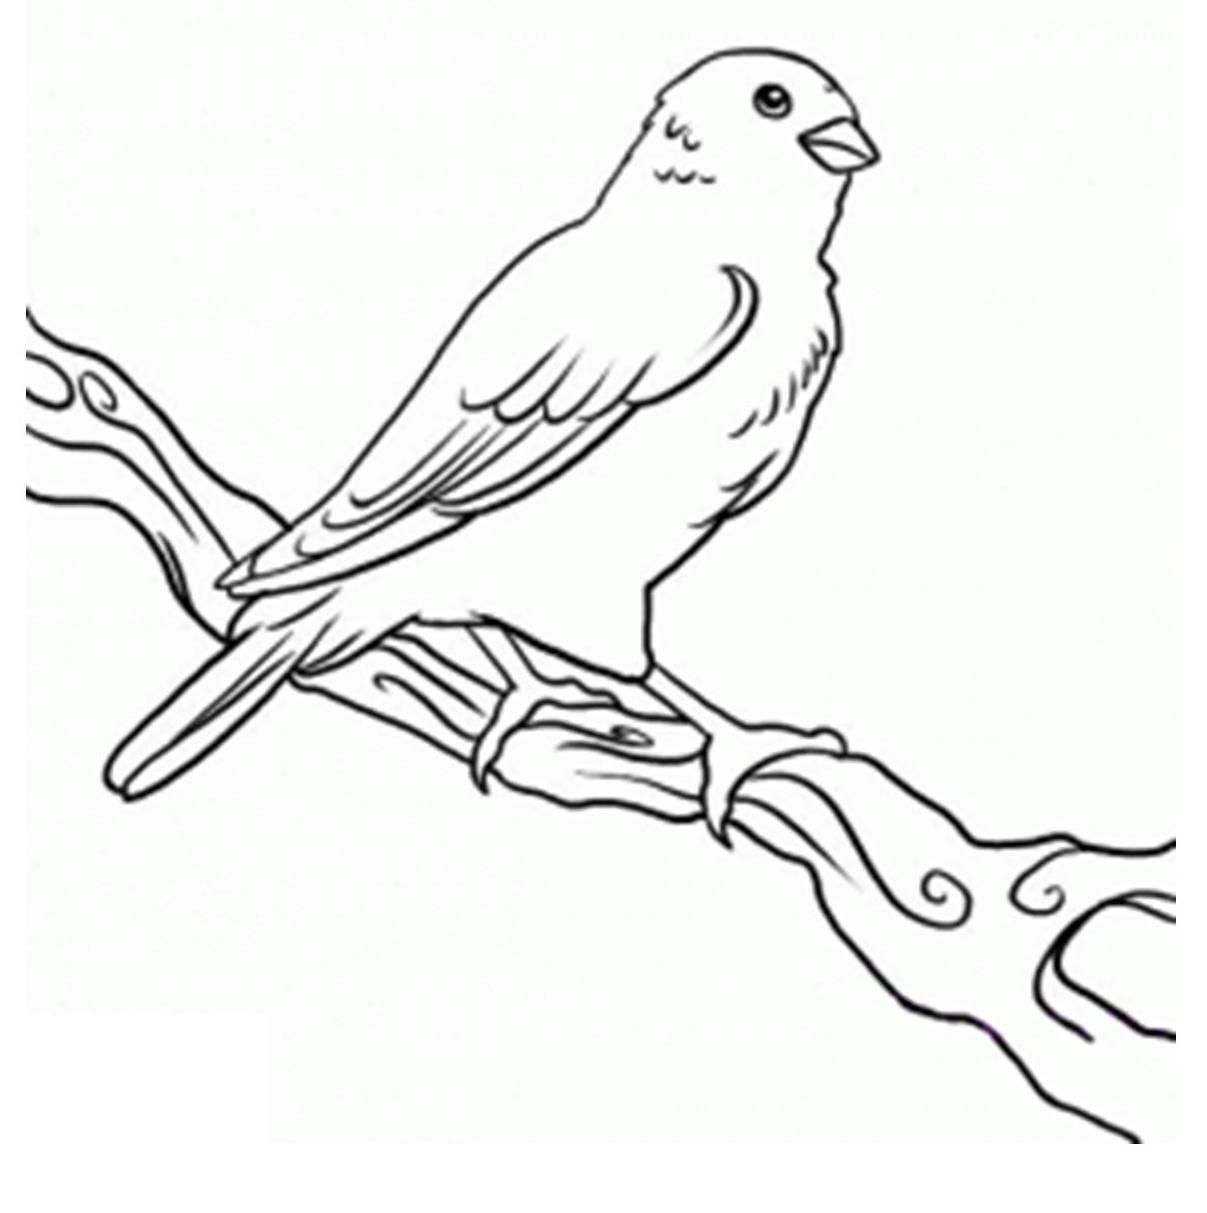 Colorado History Coloring Pages - Coloring Pages For All Ages